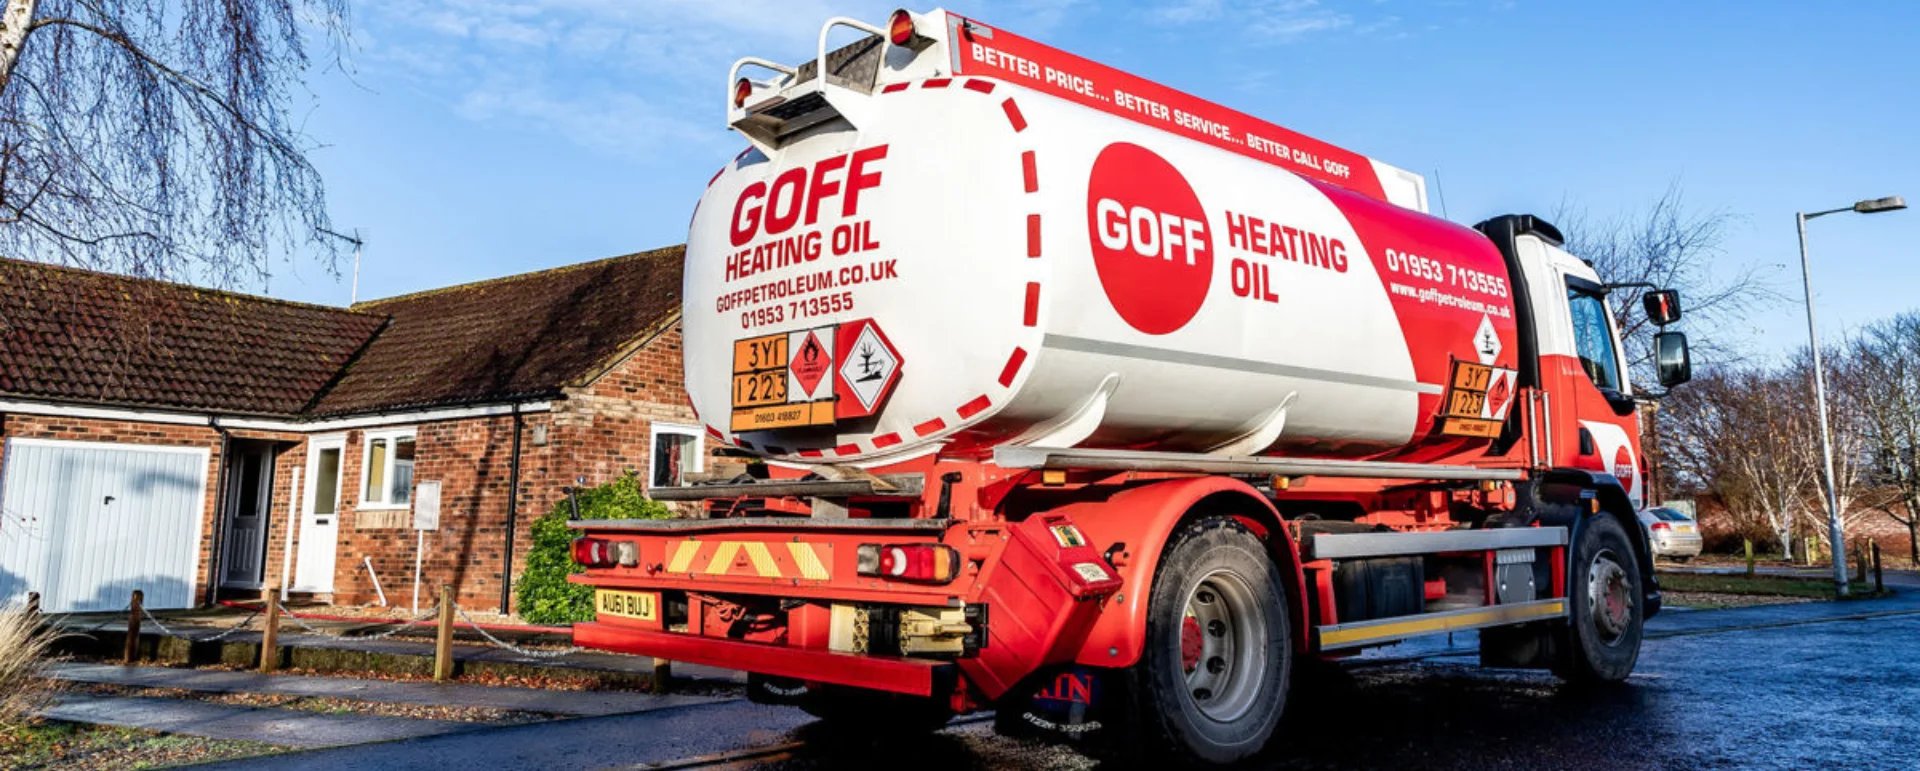 Goff Petroleum tanker parked delivering fuel to a house